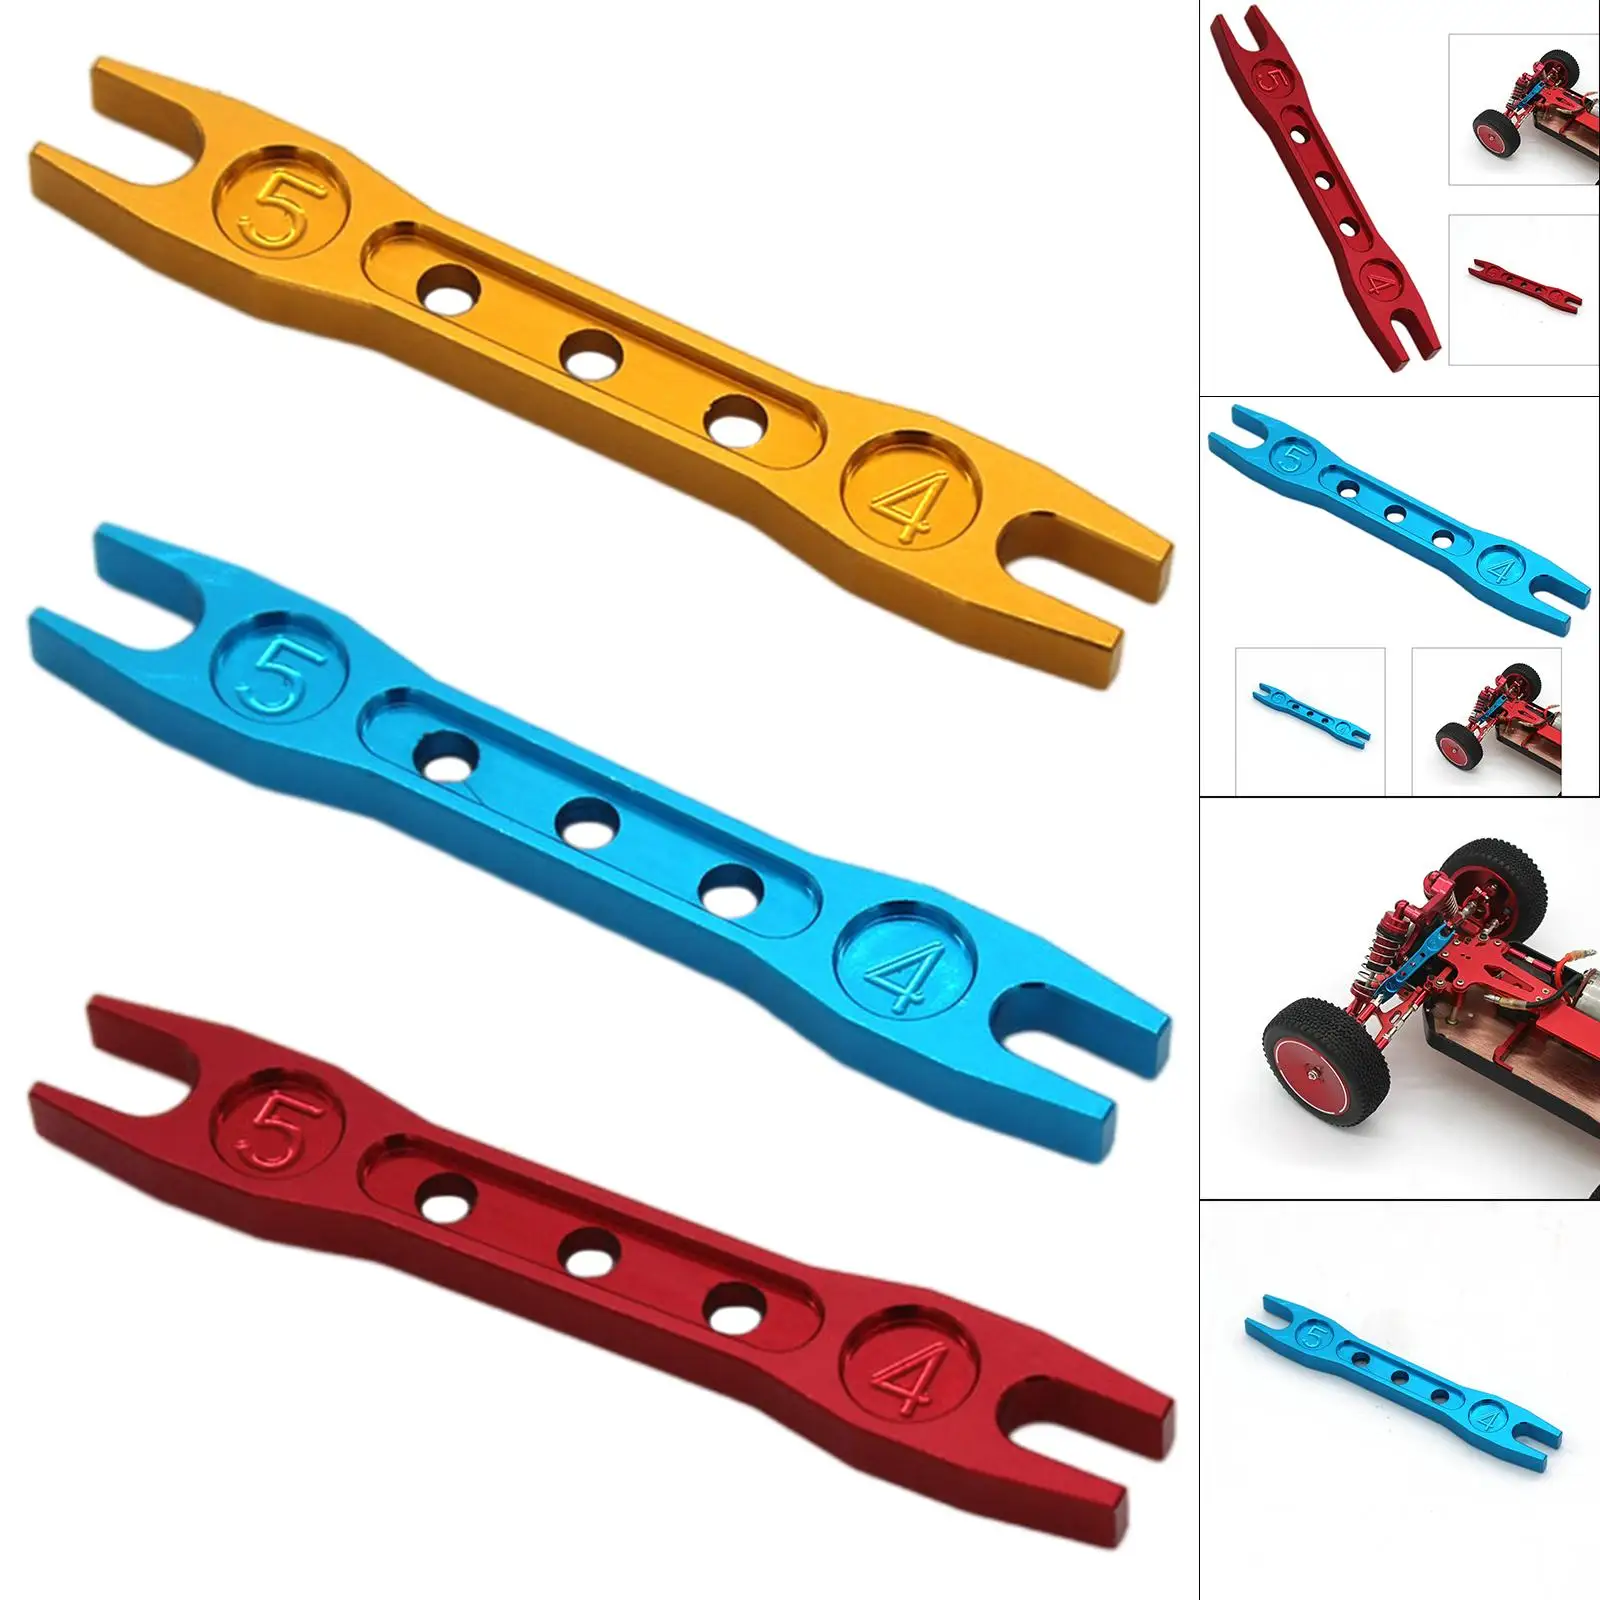 Adjustable Open-End Wrench Spanner Handle Small Aluminum Alloy 4mm 5mm Repair Tool for 124019 144001 144002 Climbing Crawler